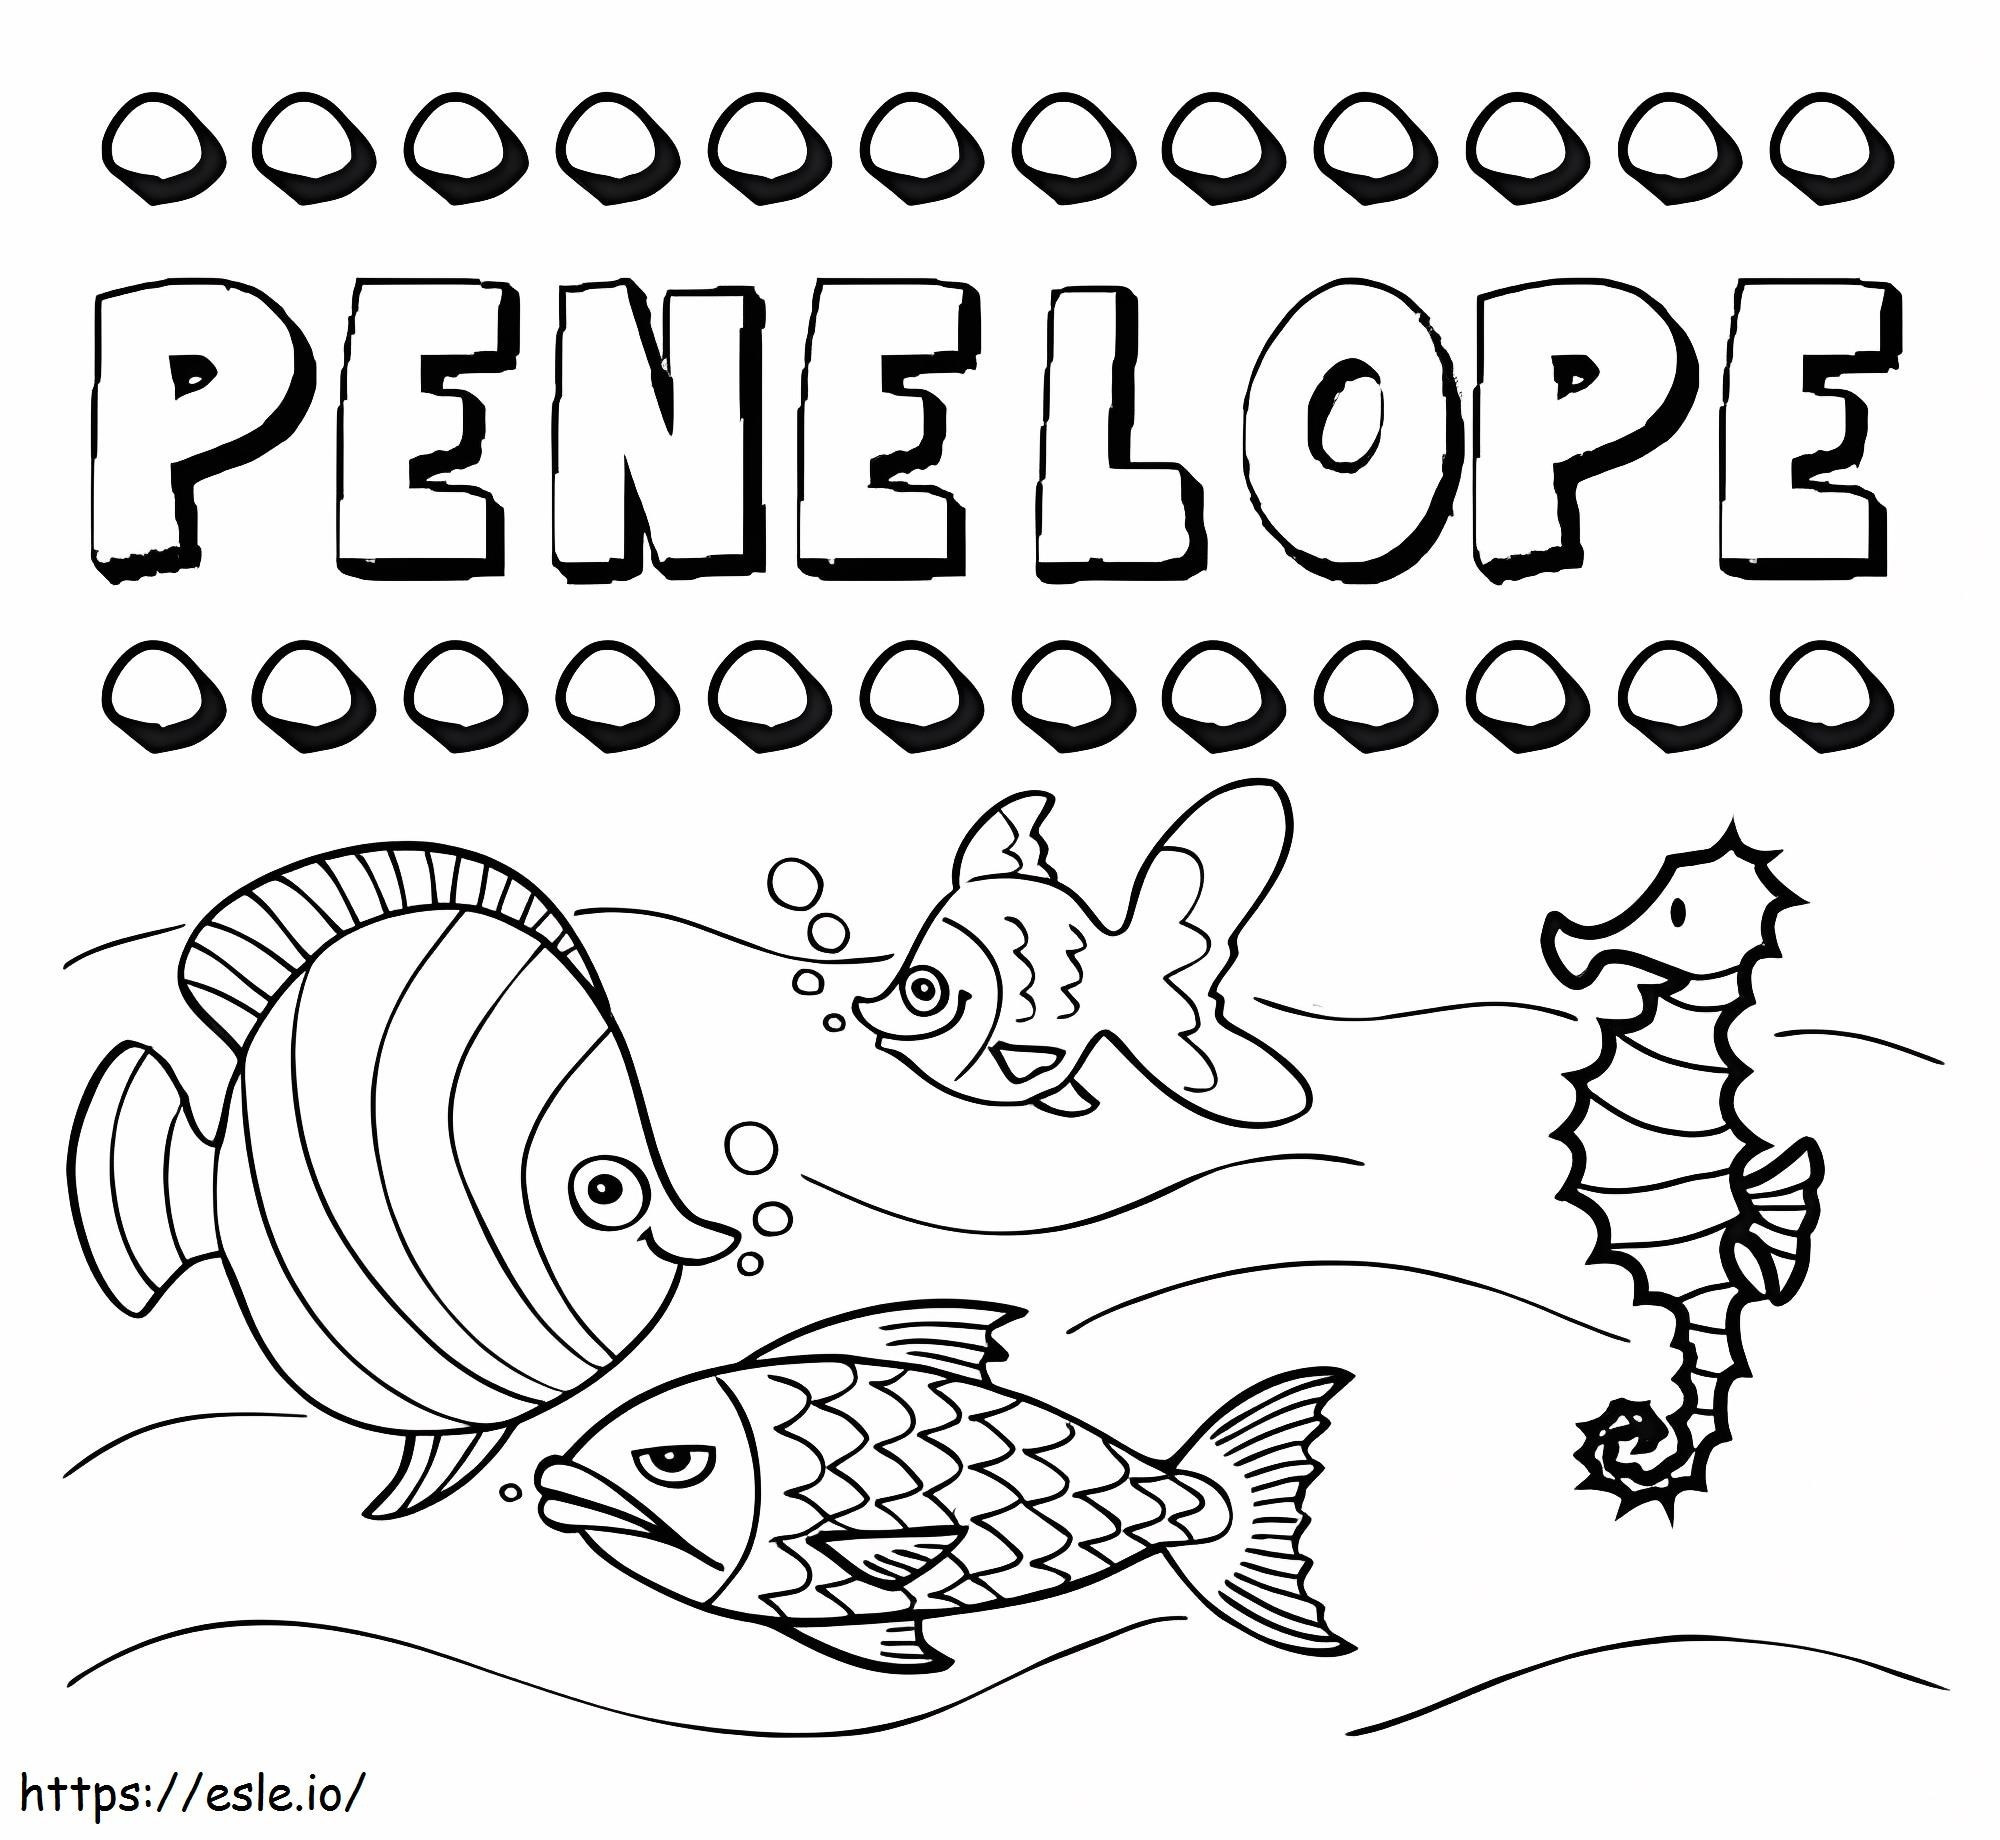 Penelope 1 coloring page